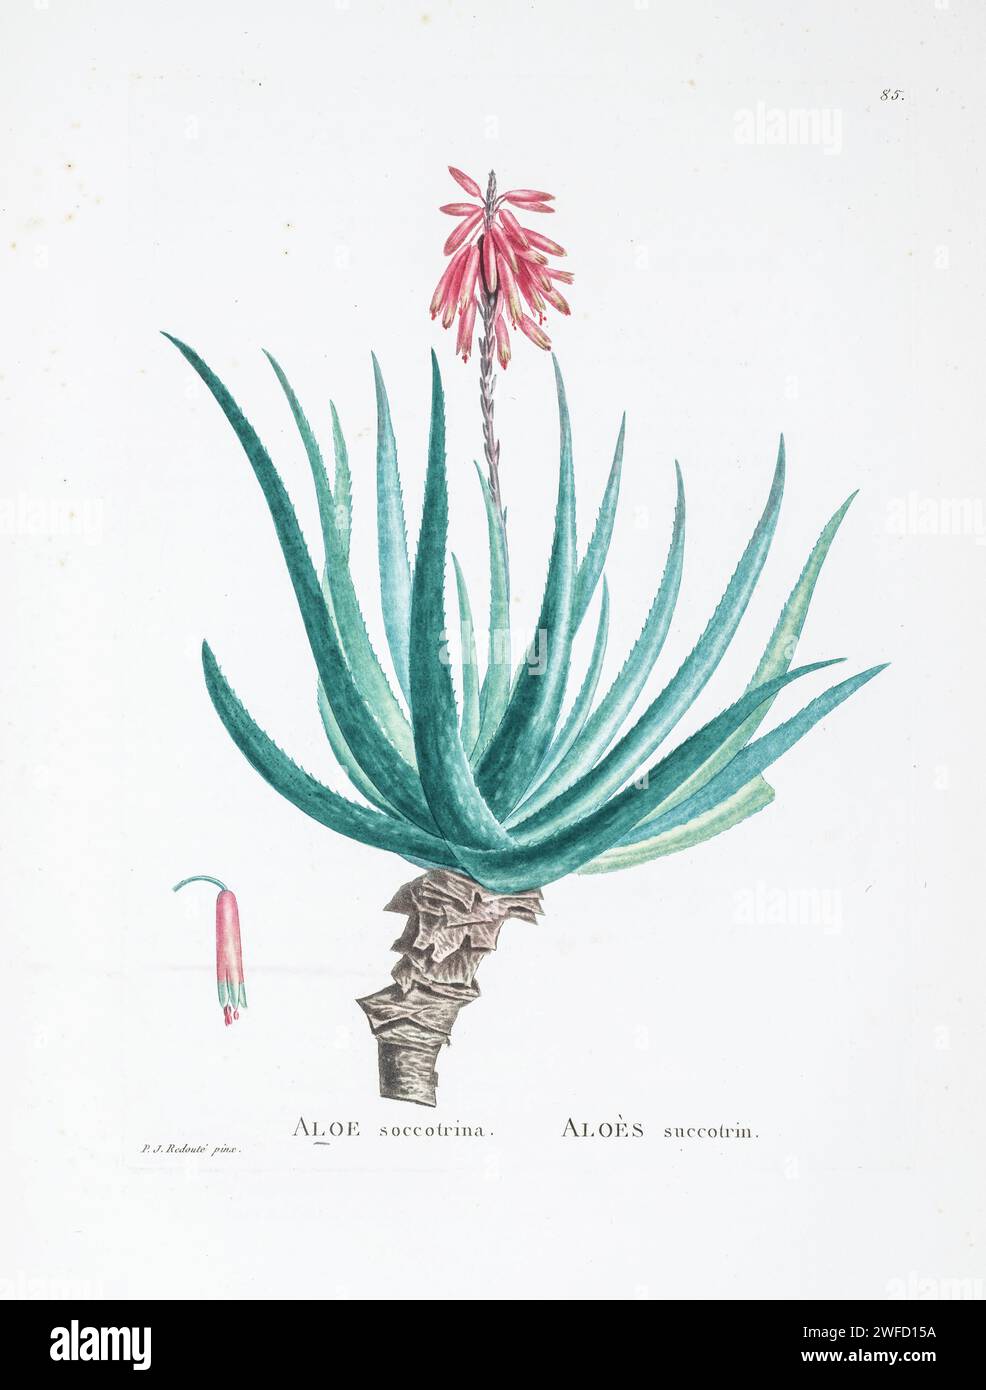 Aloe succotrina Lam. from History of Succulent Plants [Plantarum historia succulentarum / Histoire des plantes grasses] painted by Pierre-Joseph Redouté and described by Augustin Pyramus de Candolle 1799 Aloe succotrina, the Fynbos aloe, is an aloe which is endemic to Cape Town and the south-western corner of the Western Cape, South Africa. Stock Photo